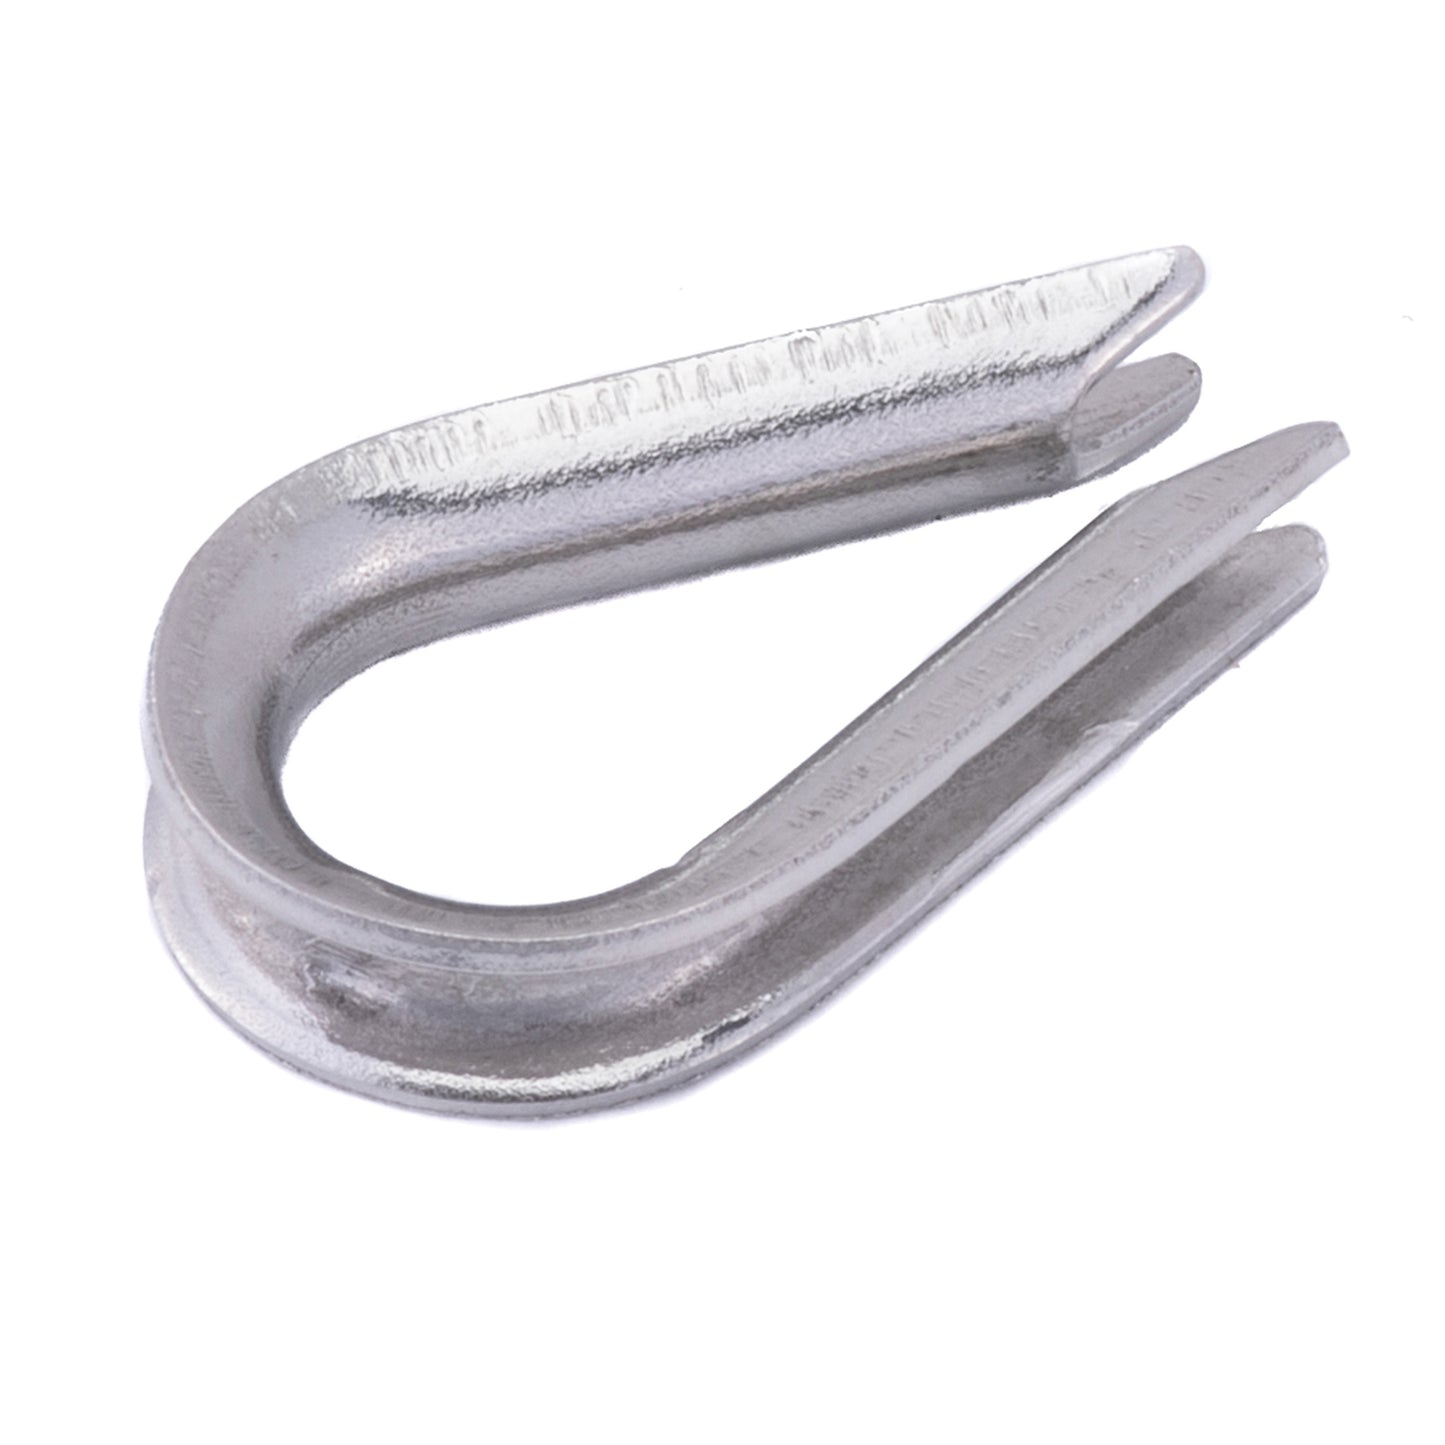 1/16" Stainless Steel Rope Thimble